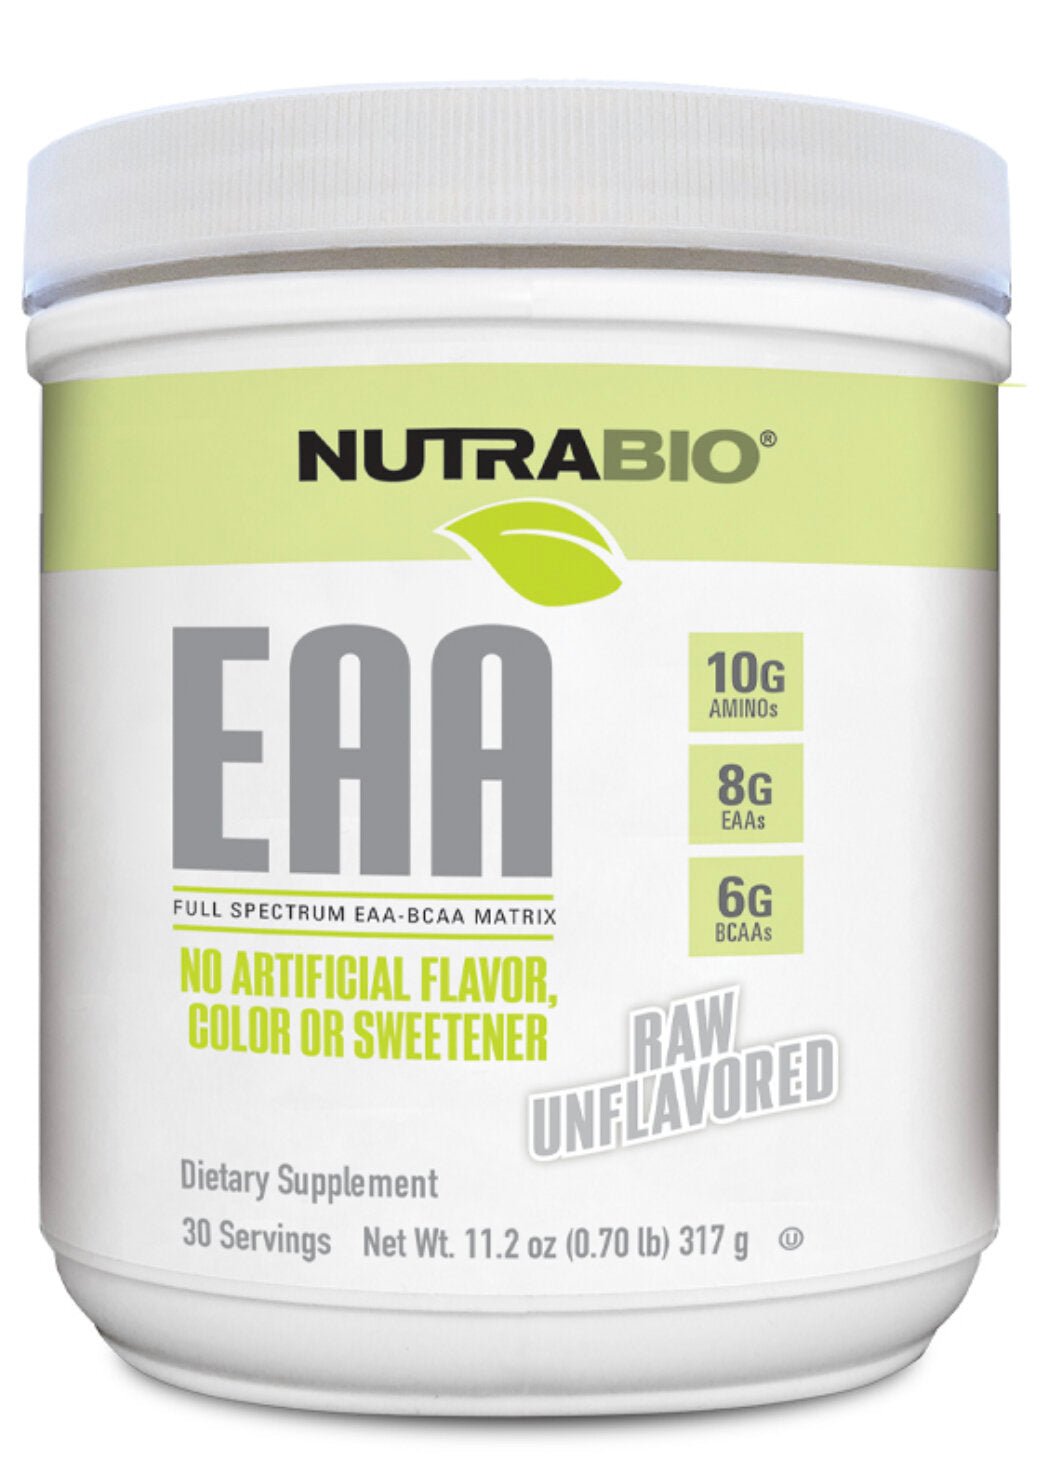 NutraBio- EAA Raw Unflavored 30 Servings - Krazy Muscle Nutrition Not specifiedSQ1144881